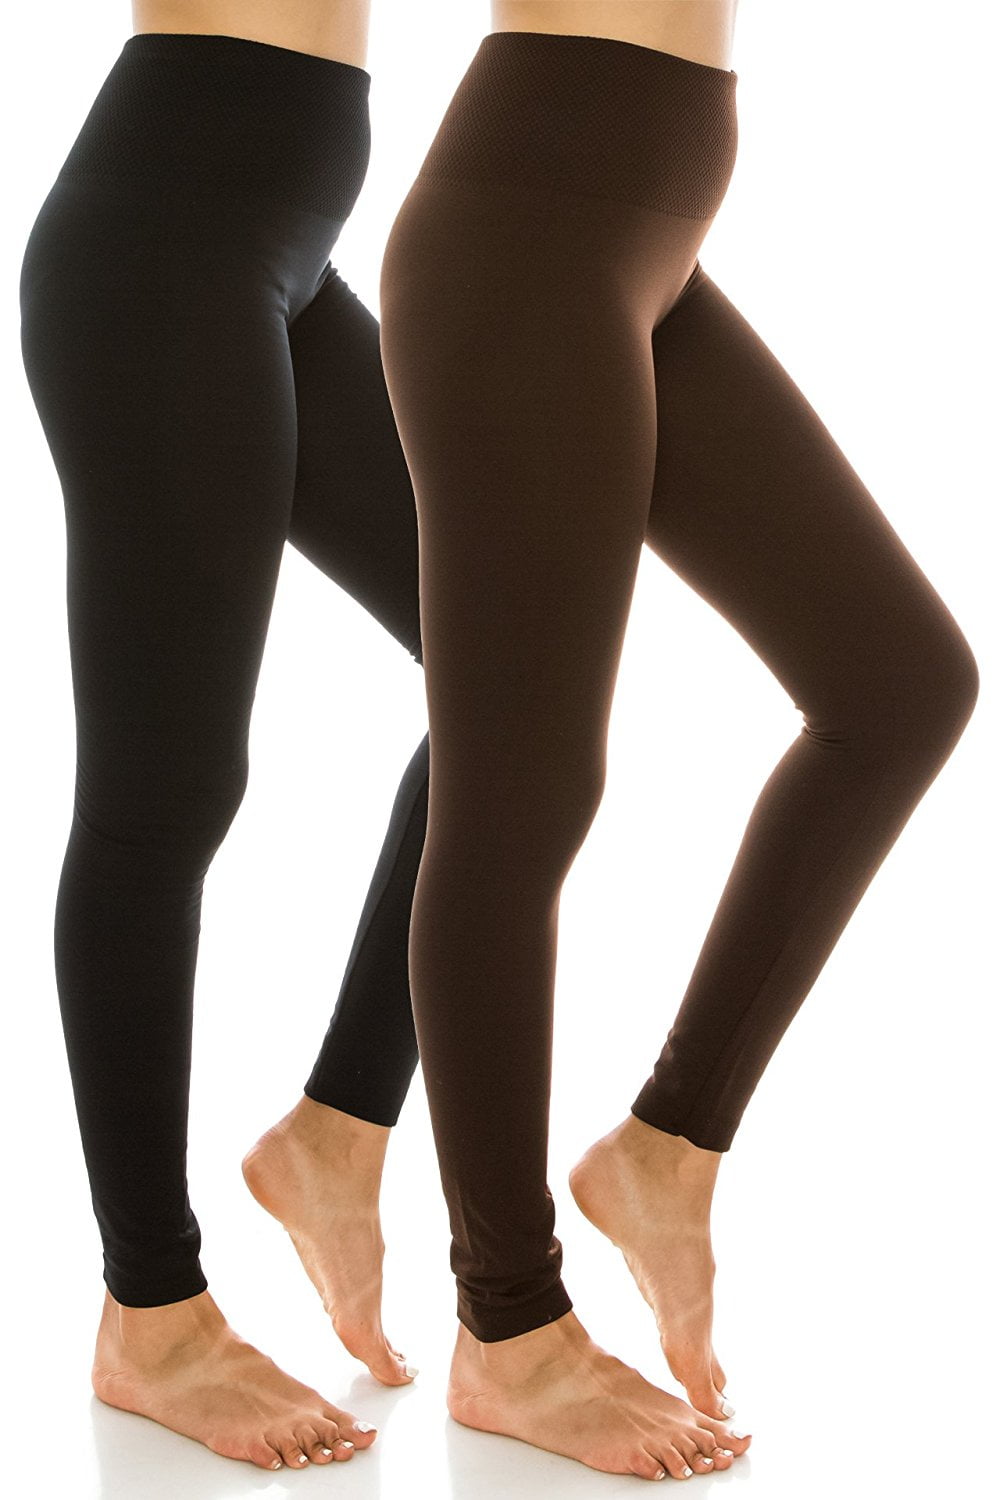 Women's Plus Size Solid Color Seamless Fleece Lined Leggings. - Fleece  Lined - 2 Elastic Waistband - Full-Length - One size fits most 16-22 -  Inseam Approximately 26 L - 92% Nylon / 8% Spandex, 7316610